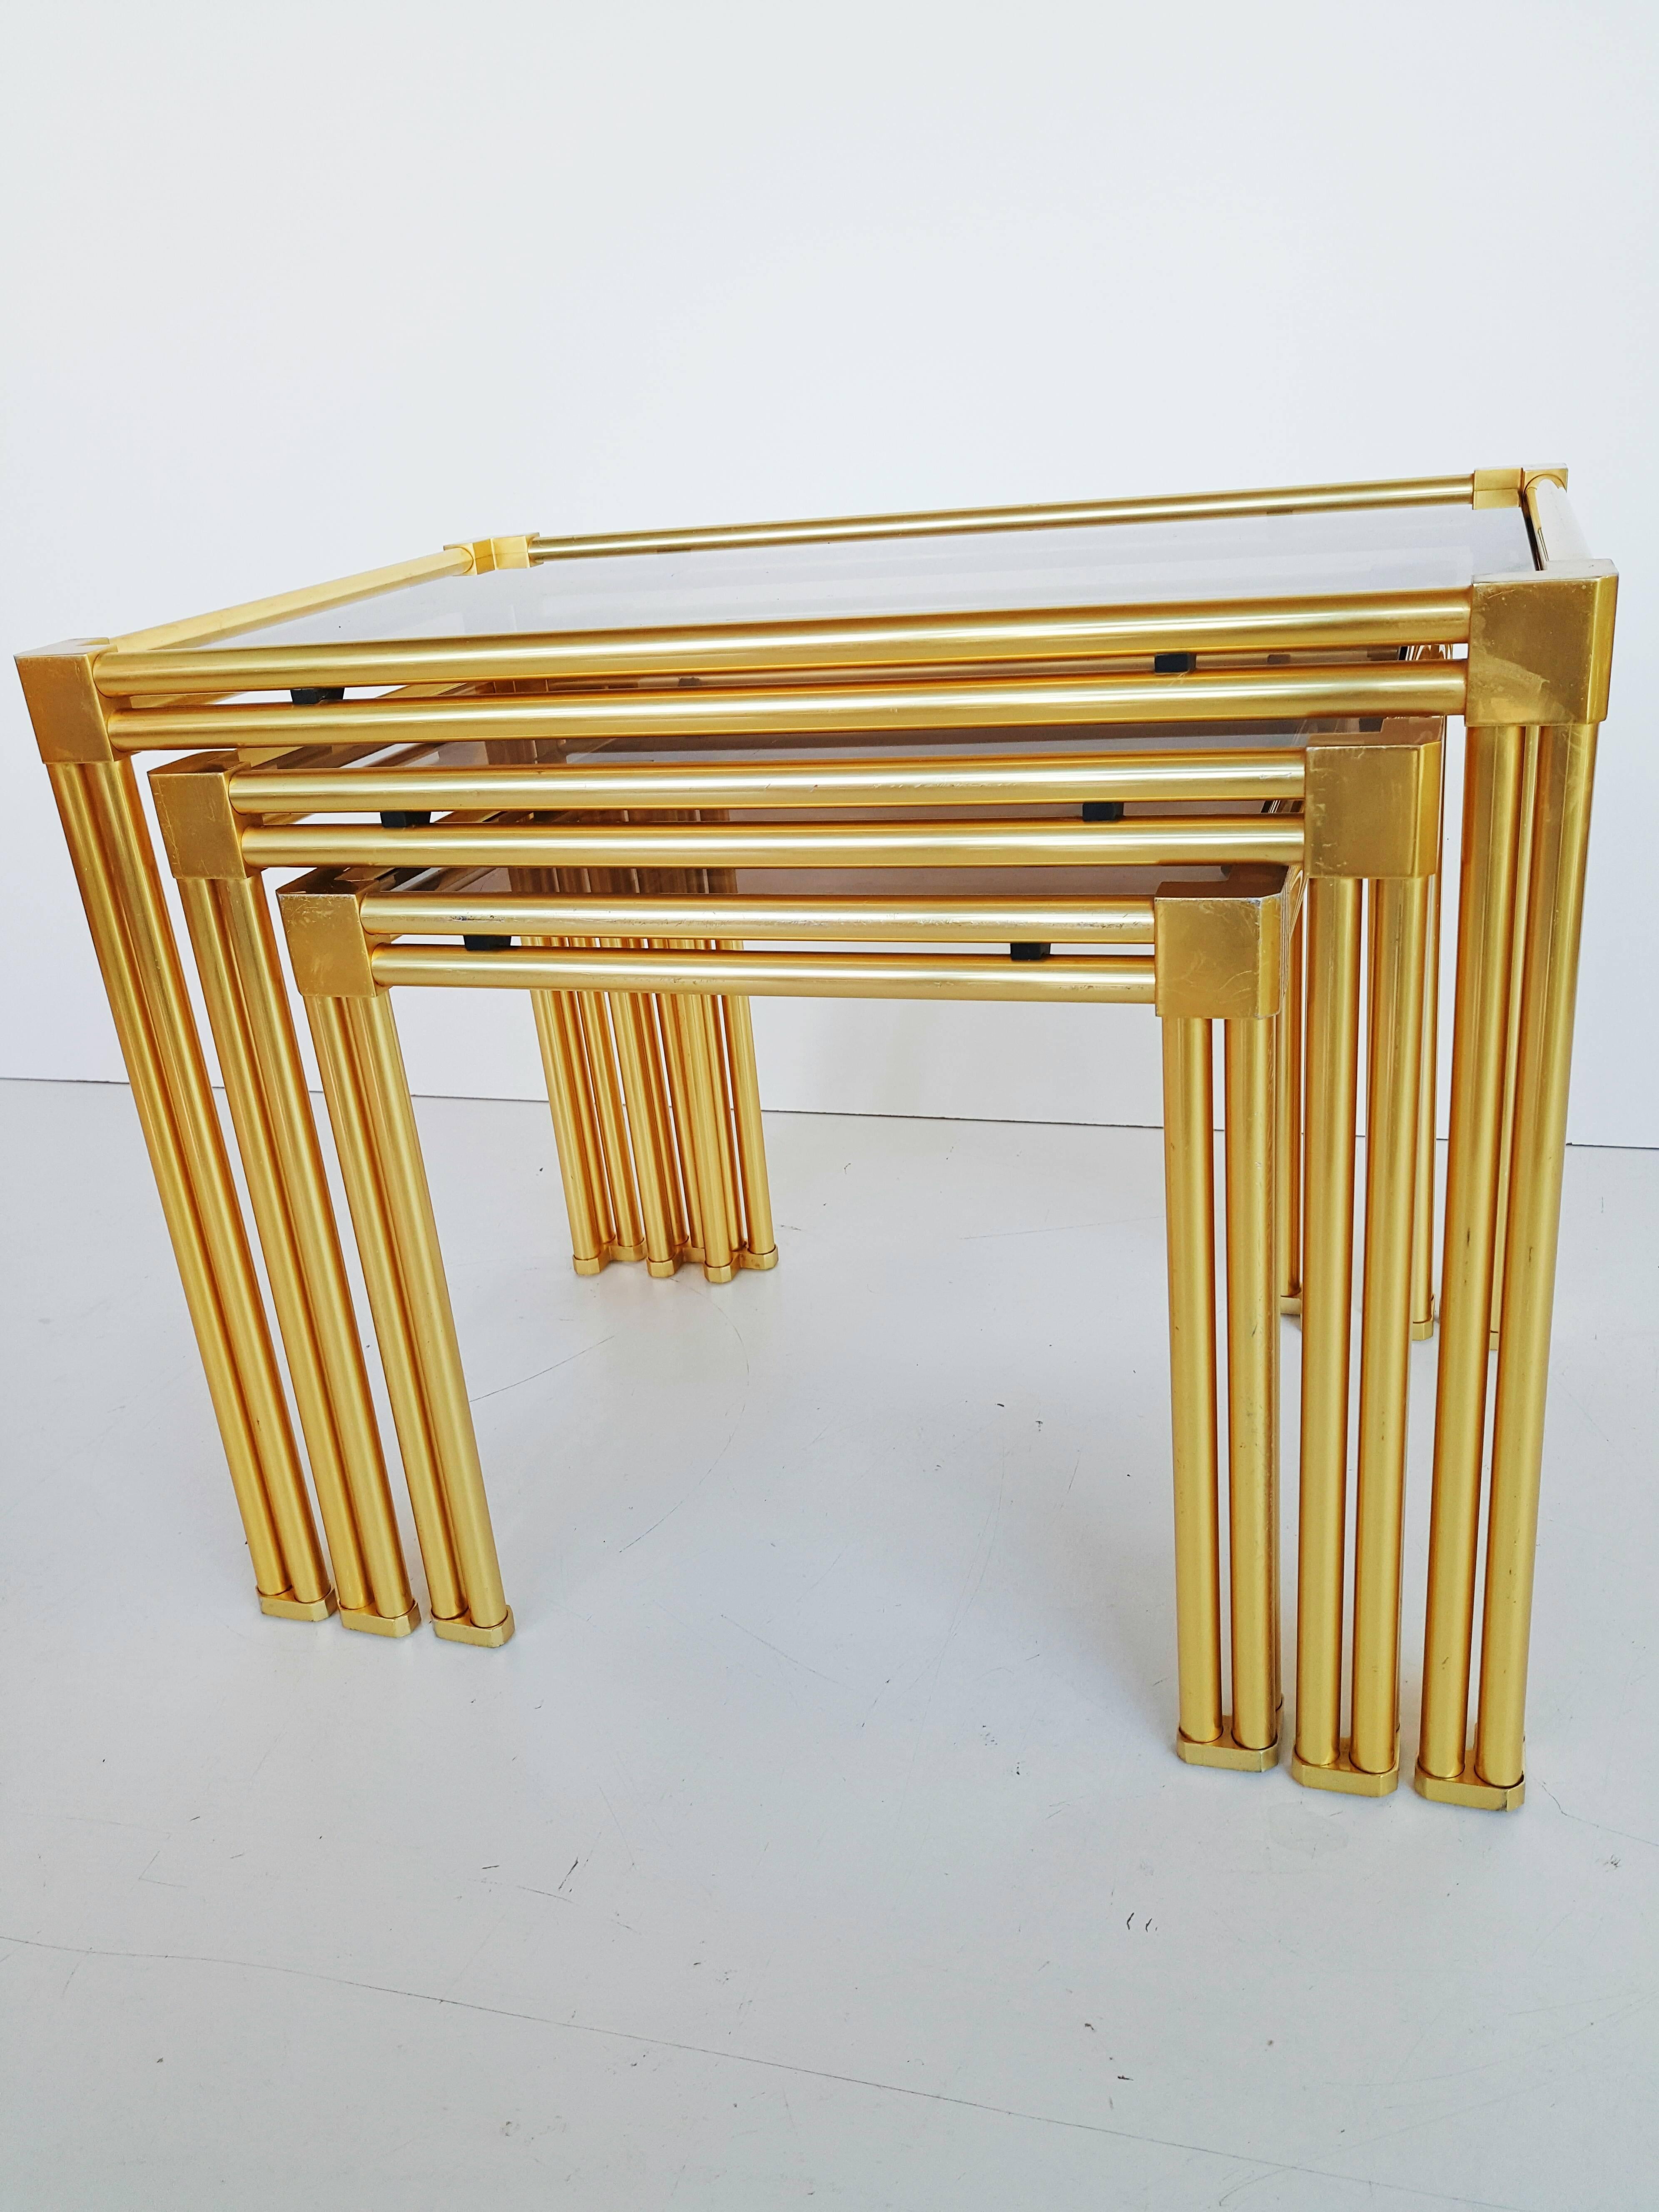 Beautiful French brass and smoked glass nesting tables, circa 1970, in perfect vintage condition.
Dimensions(cms): 54 W x 36 D x 43 H; 45 W x 36 D x 39 H; 36 W x 36 D x 34 H.